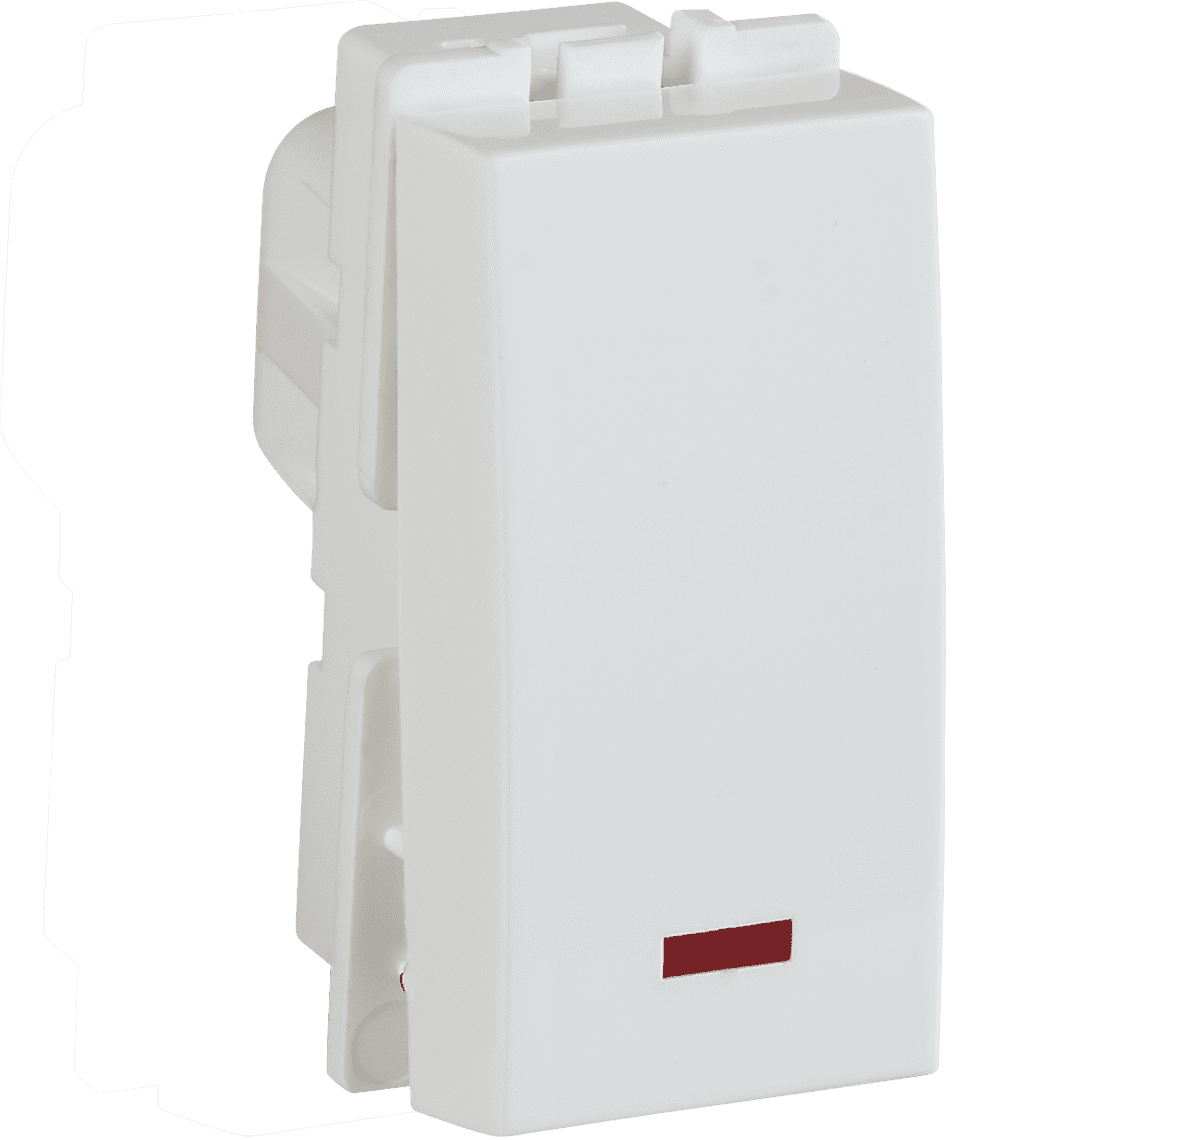 Crabtree - 16 AX 1 way Switch with Ind.